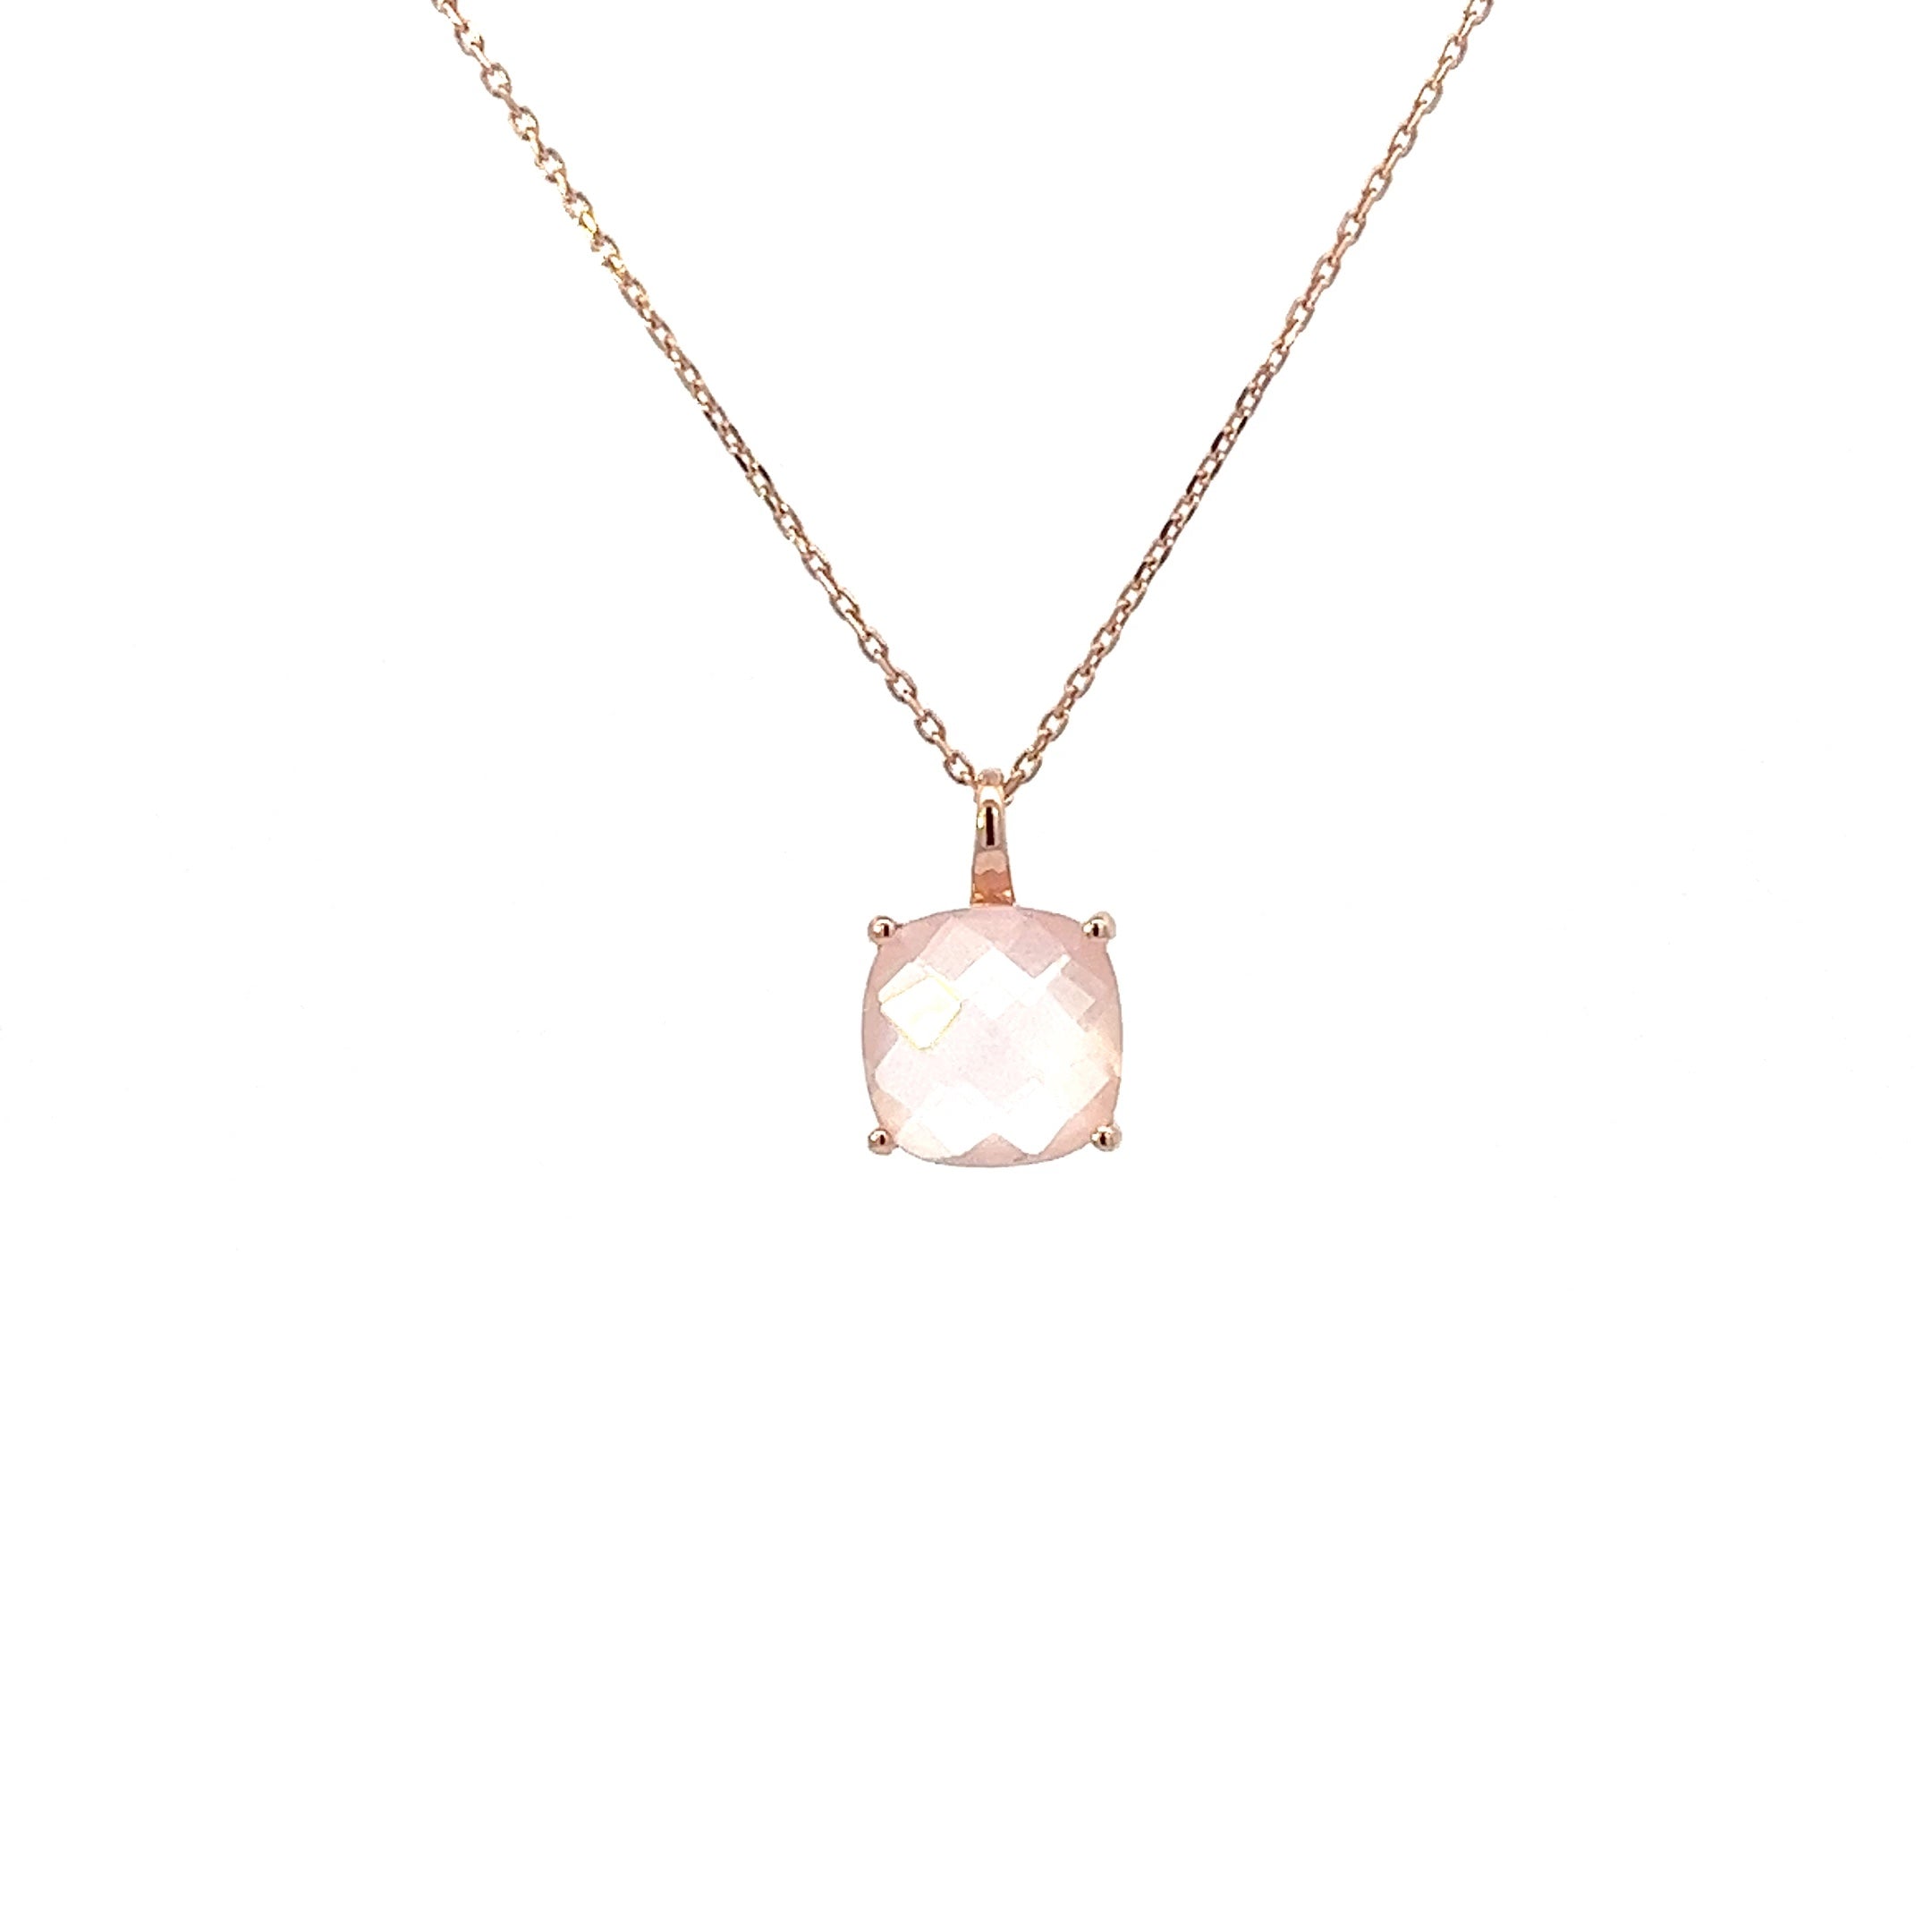 ROSE QUARTZ CUSHION NECKLACE SET IN 925 SILVER ROSE GOLD PLATED